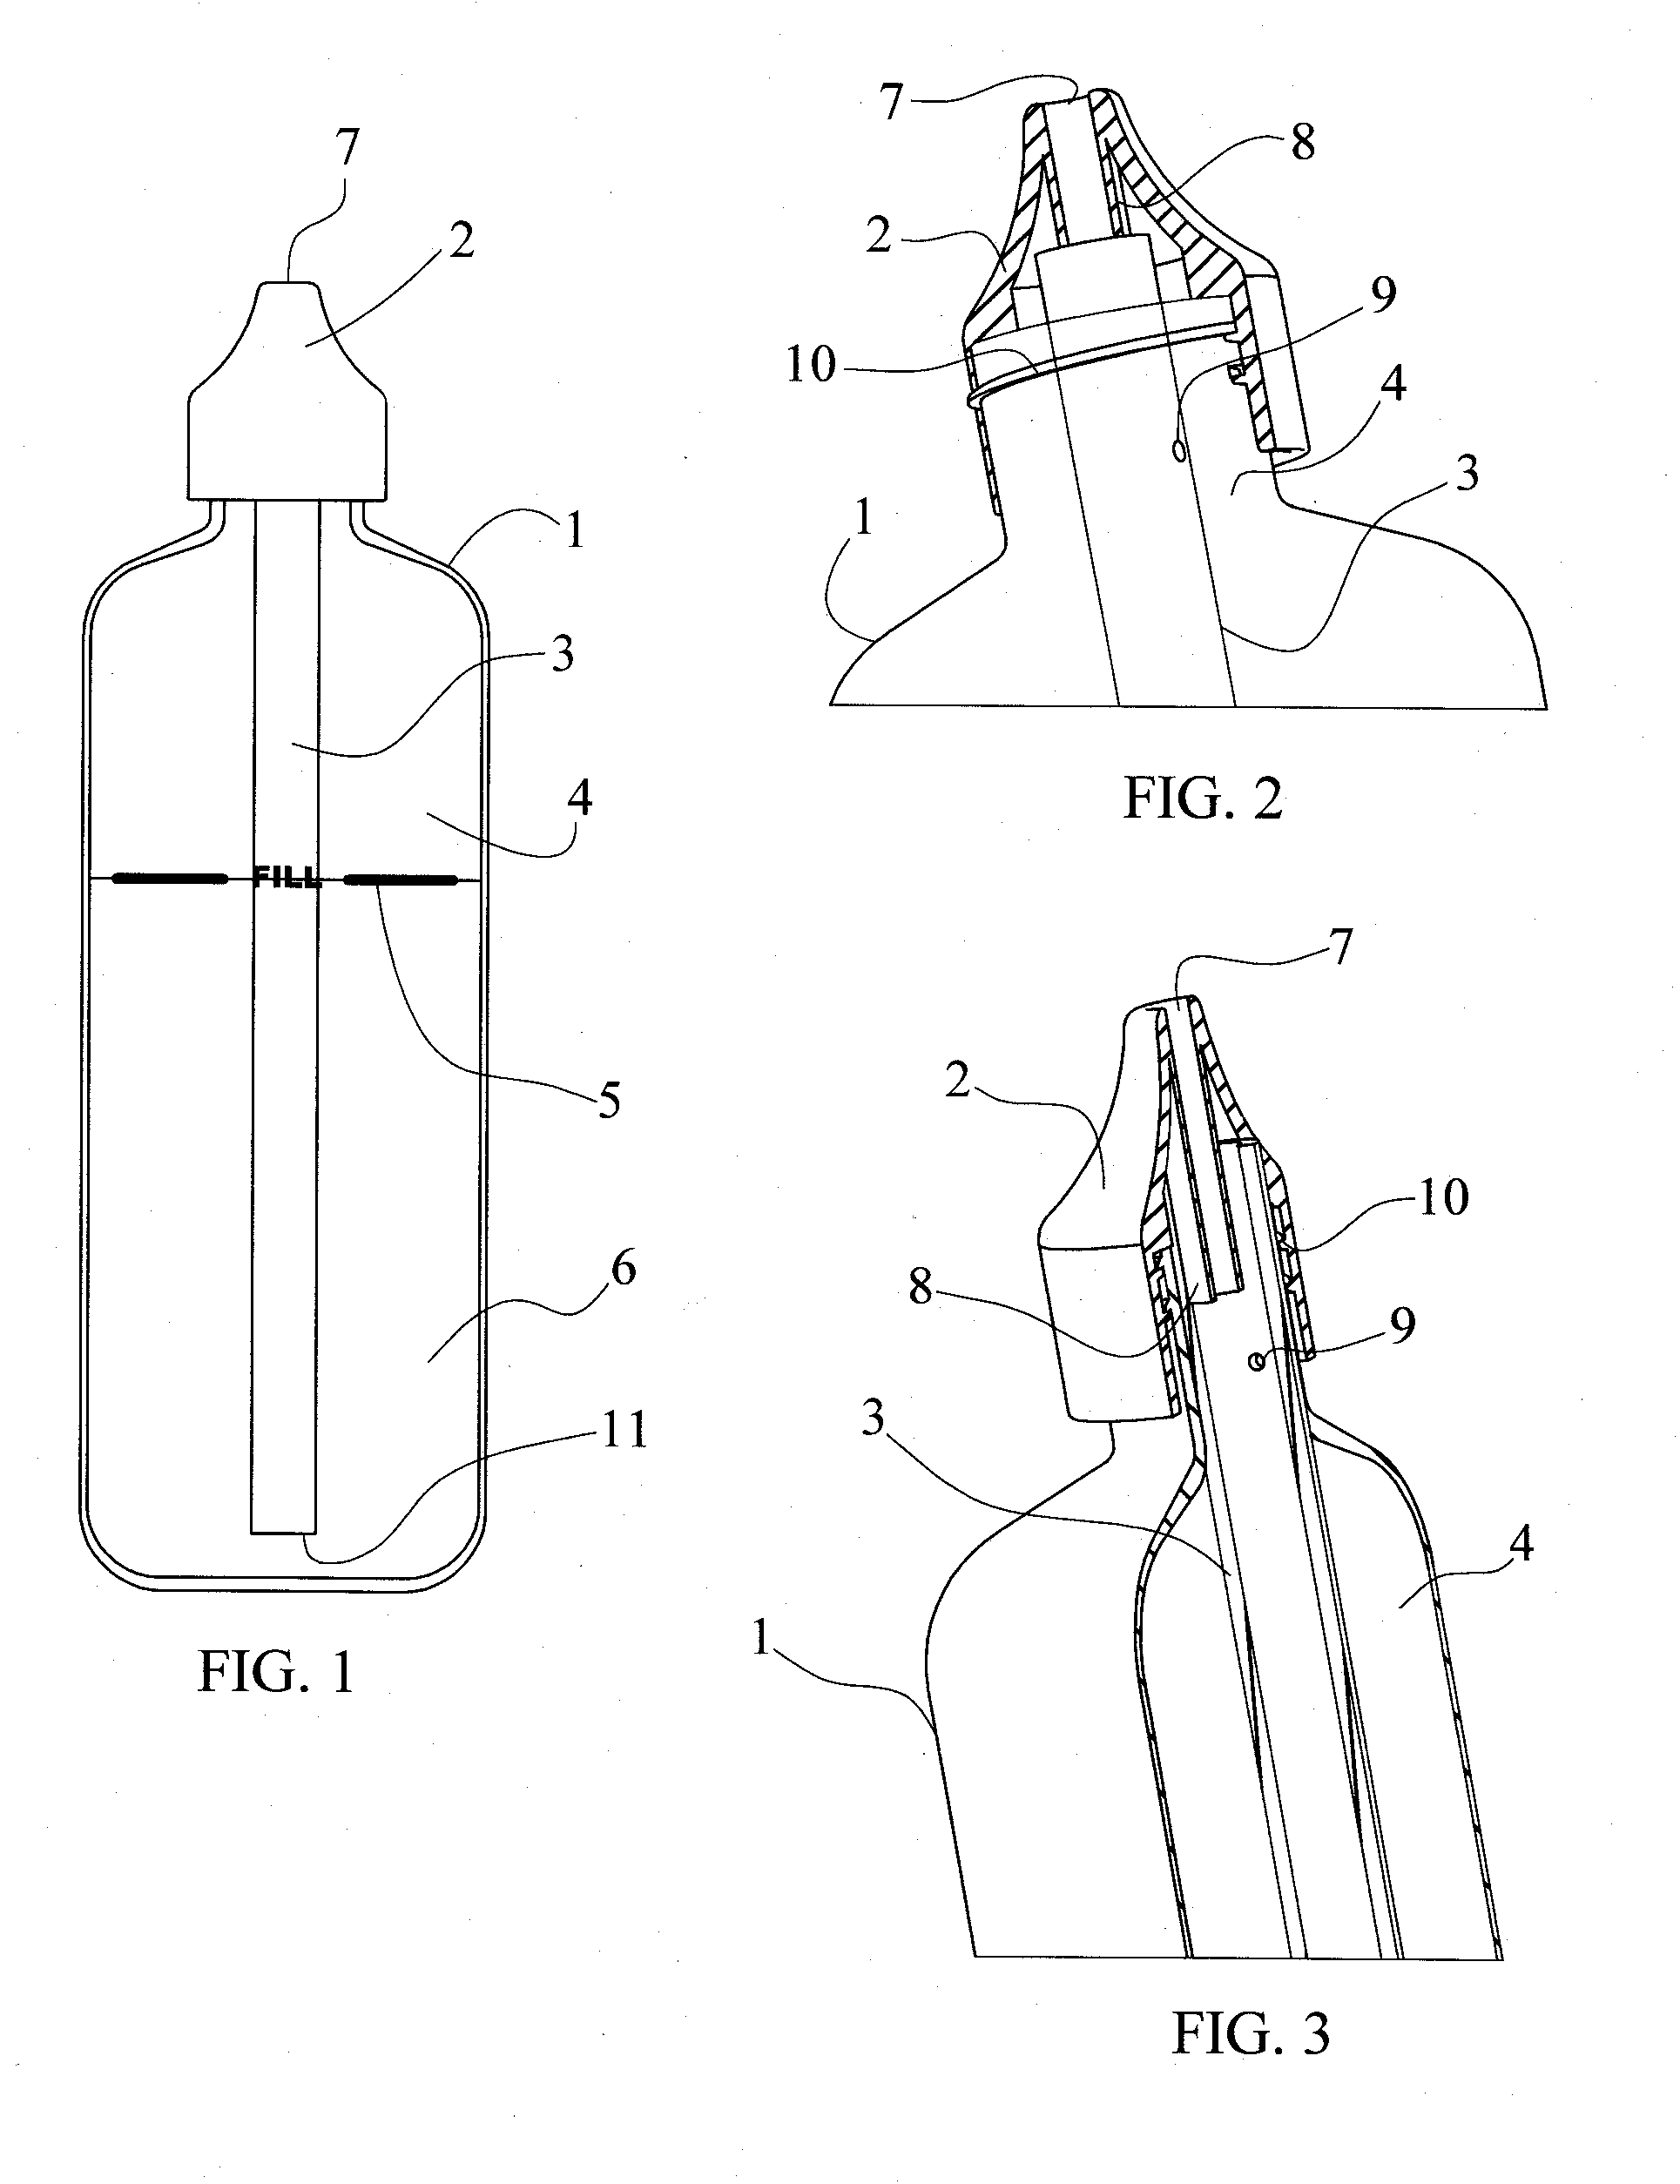 High Flow Volume Nasal Irrigation Device and Method for Alternating Pulsatile and Continuous Fluid Flow